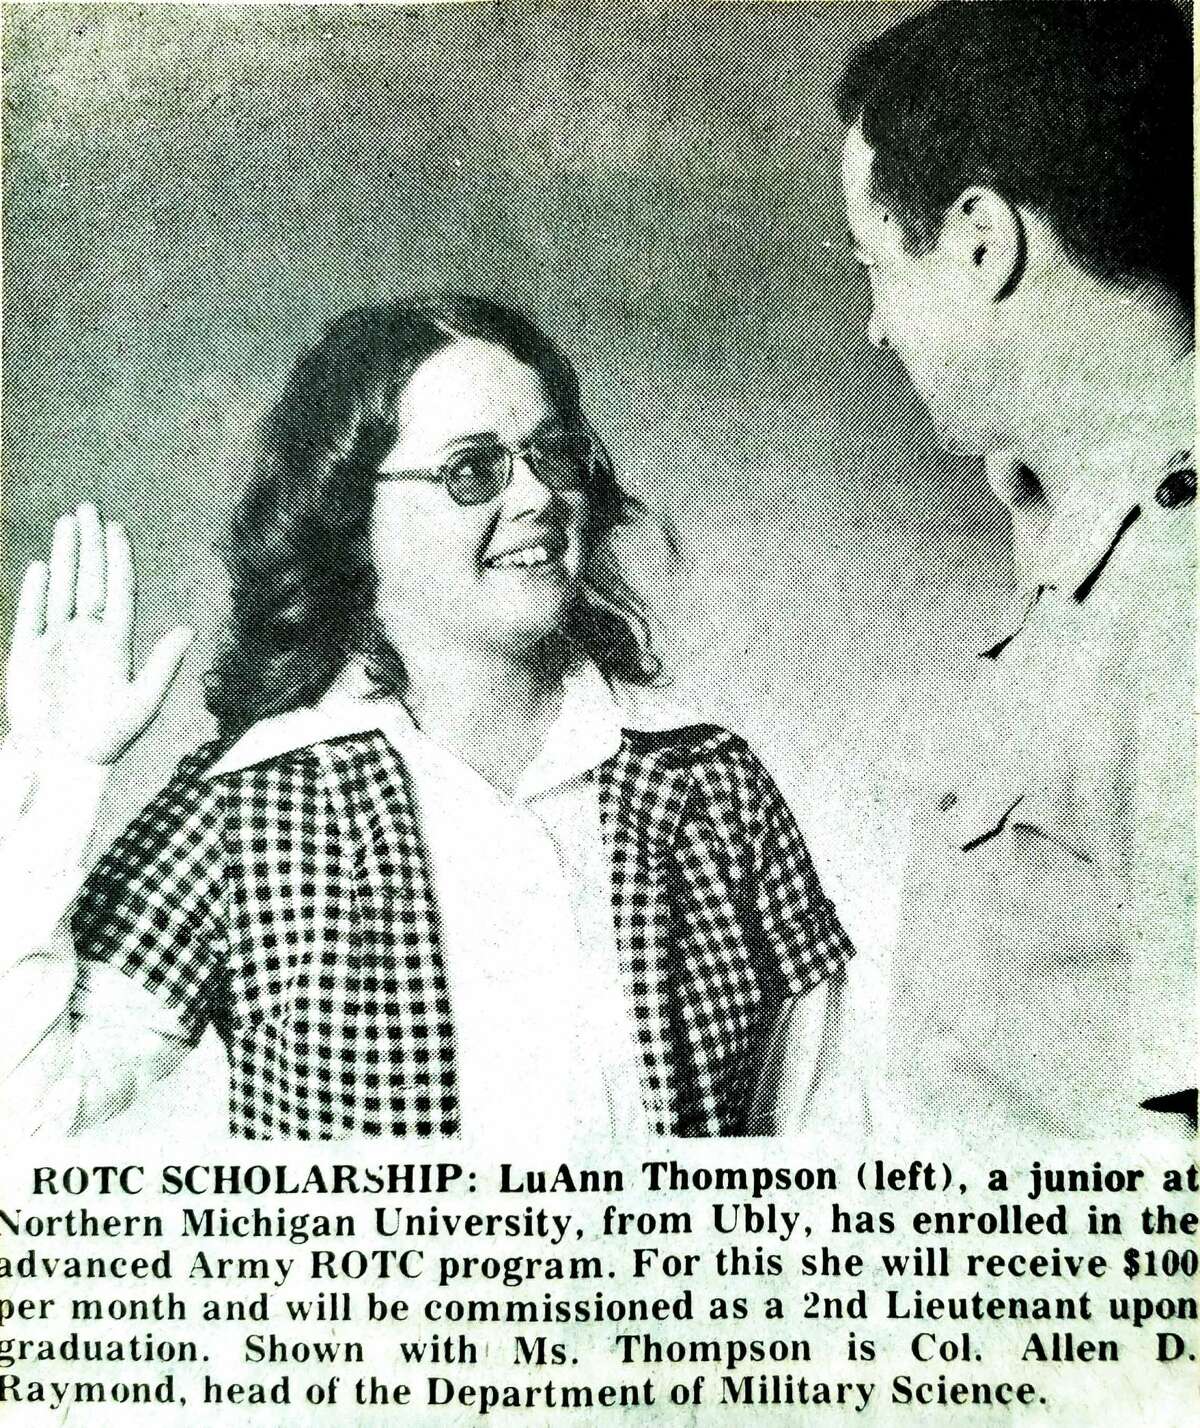 For this week's Tribune Throwback we go back to November 1975.